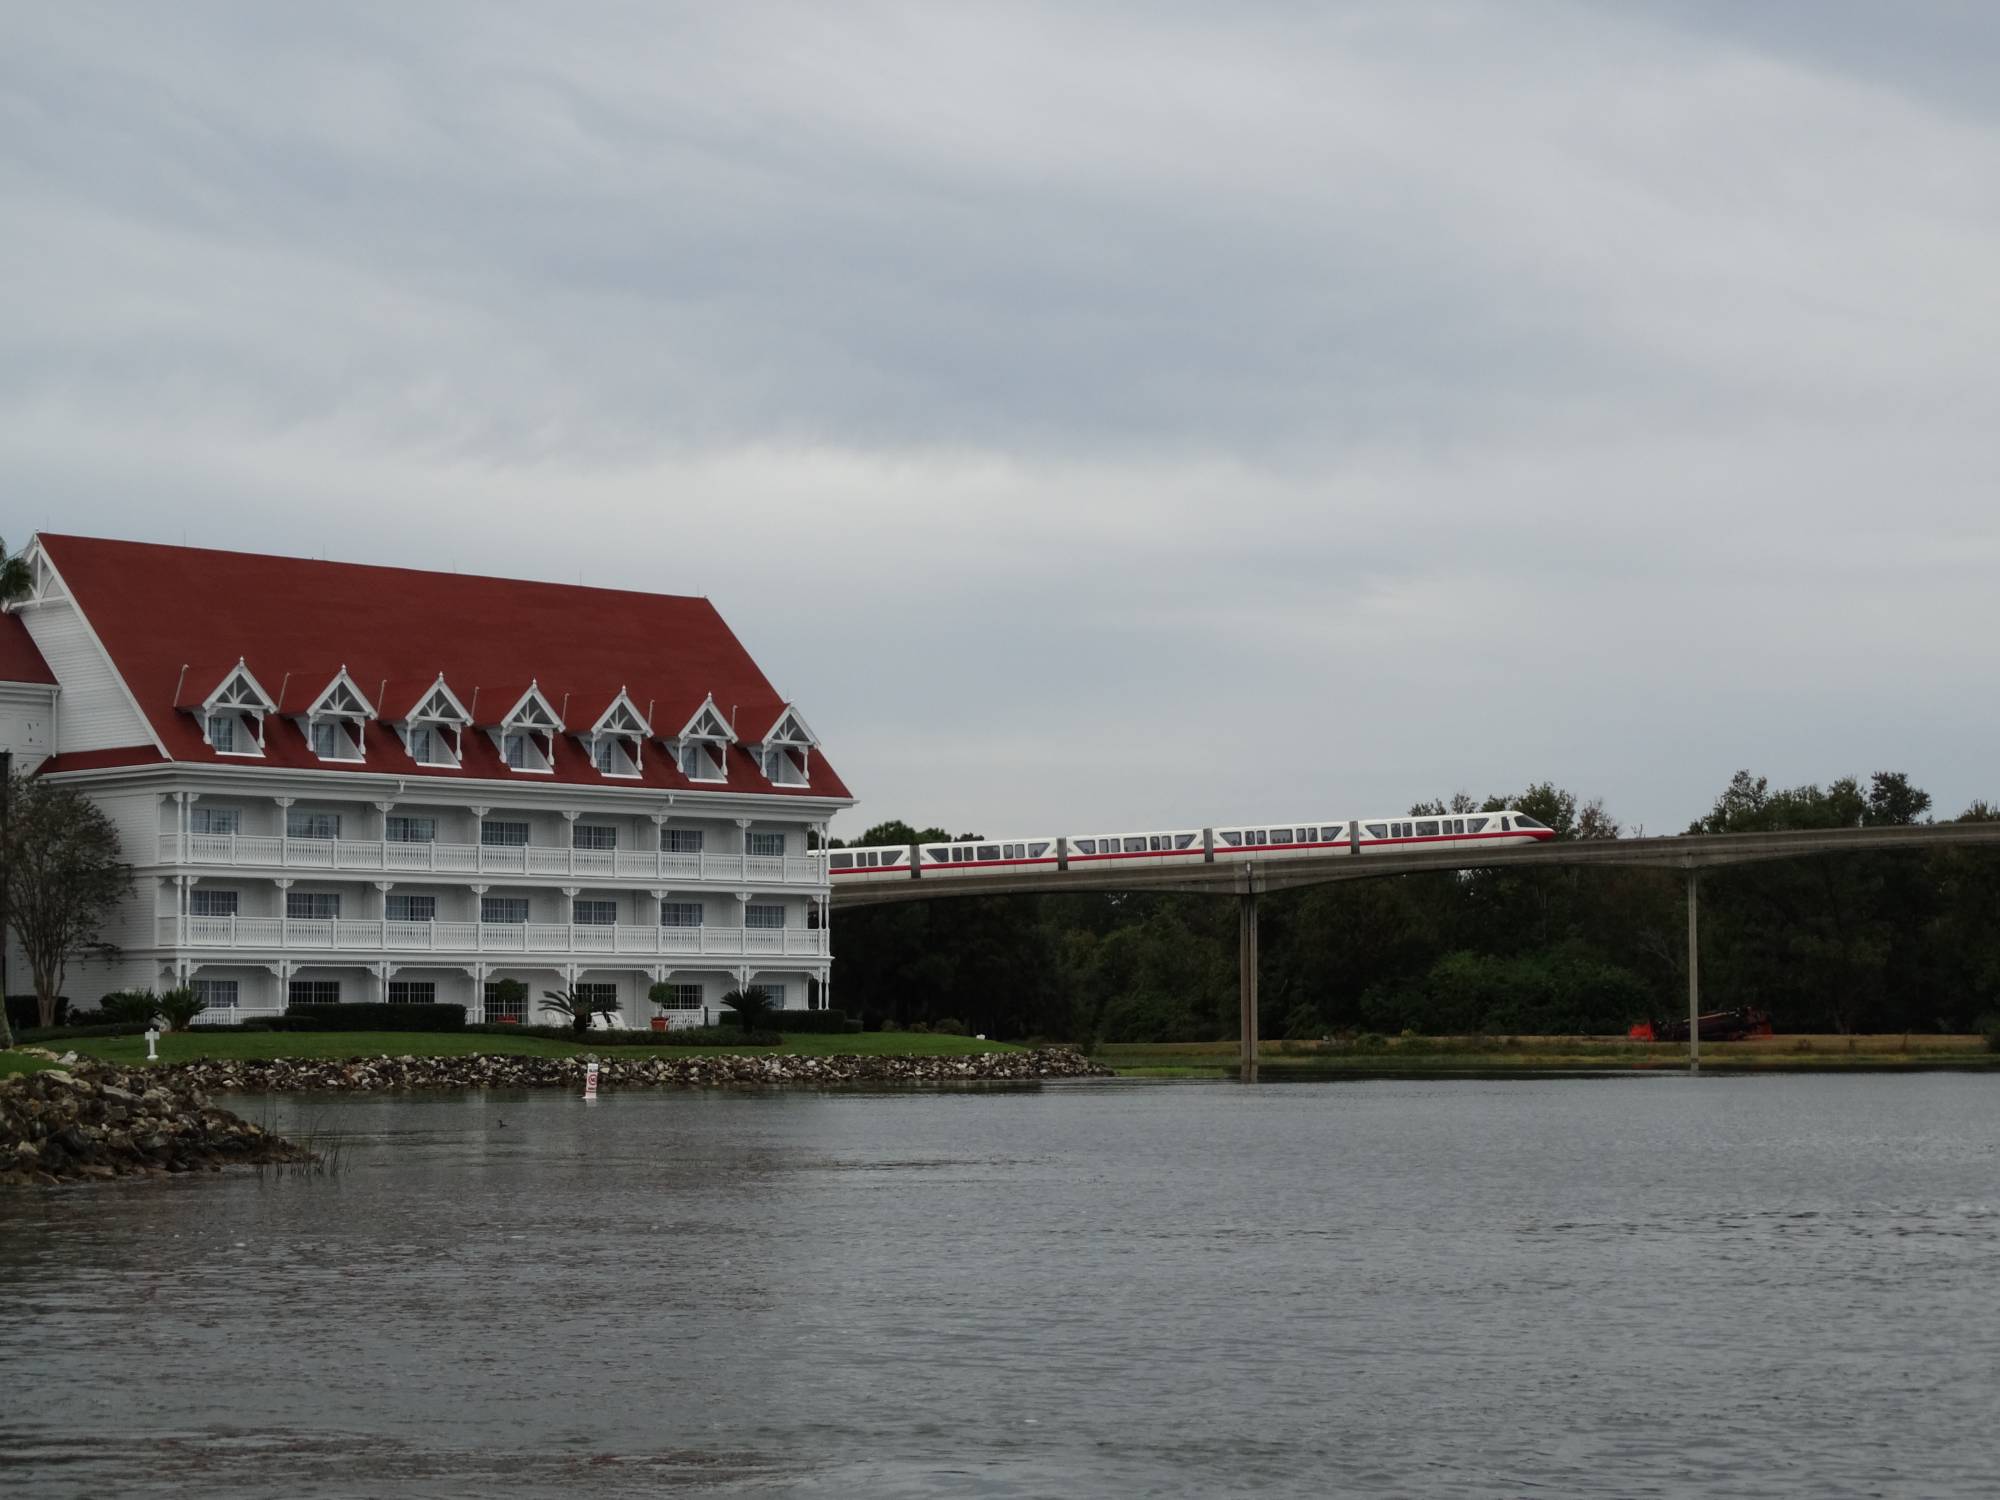 Grand Floridian - monorail